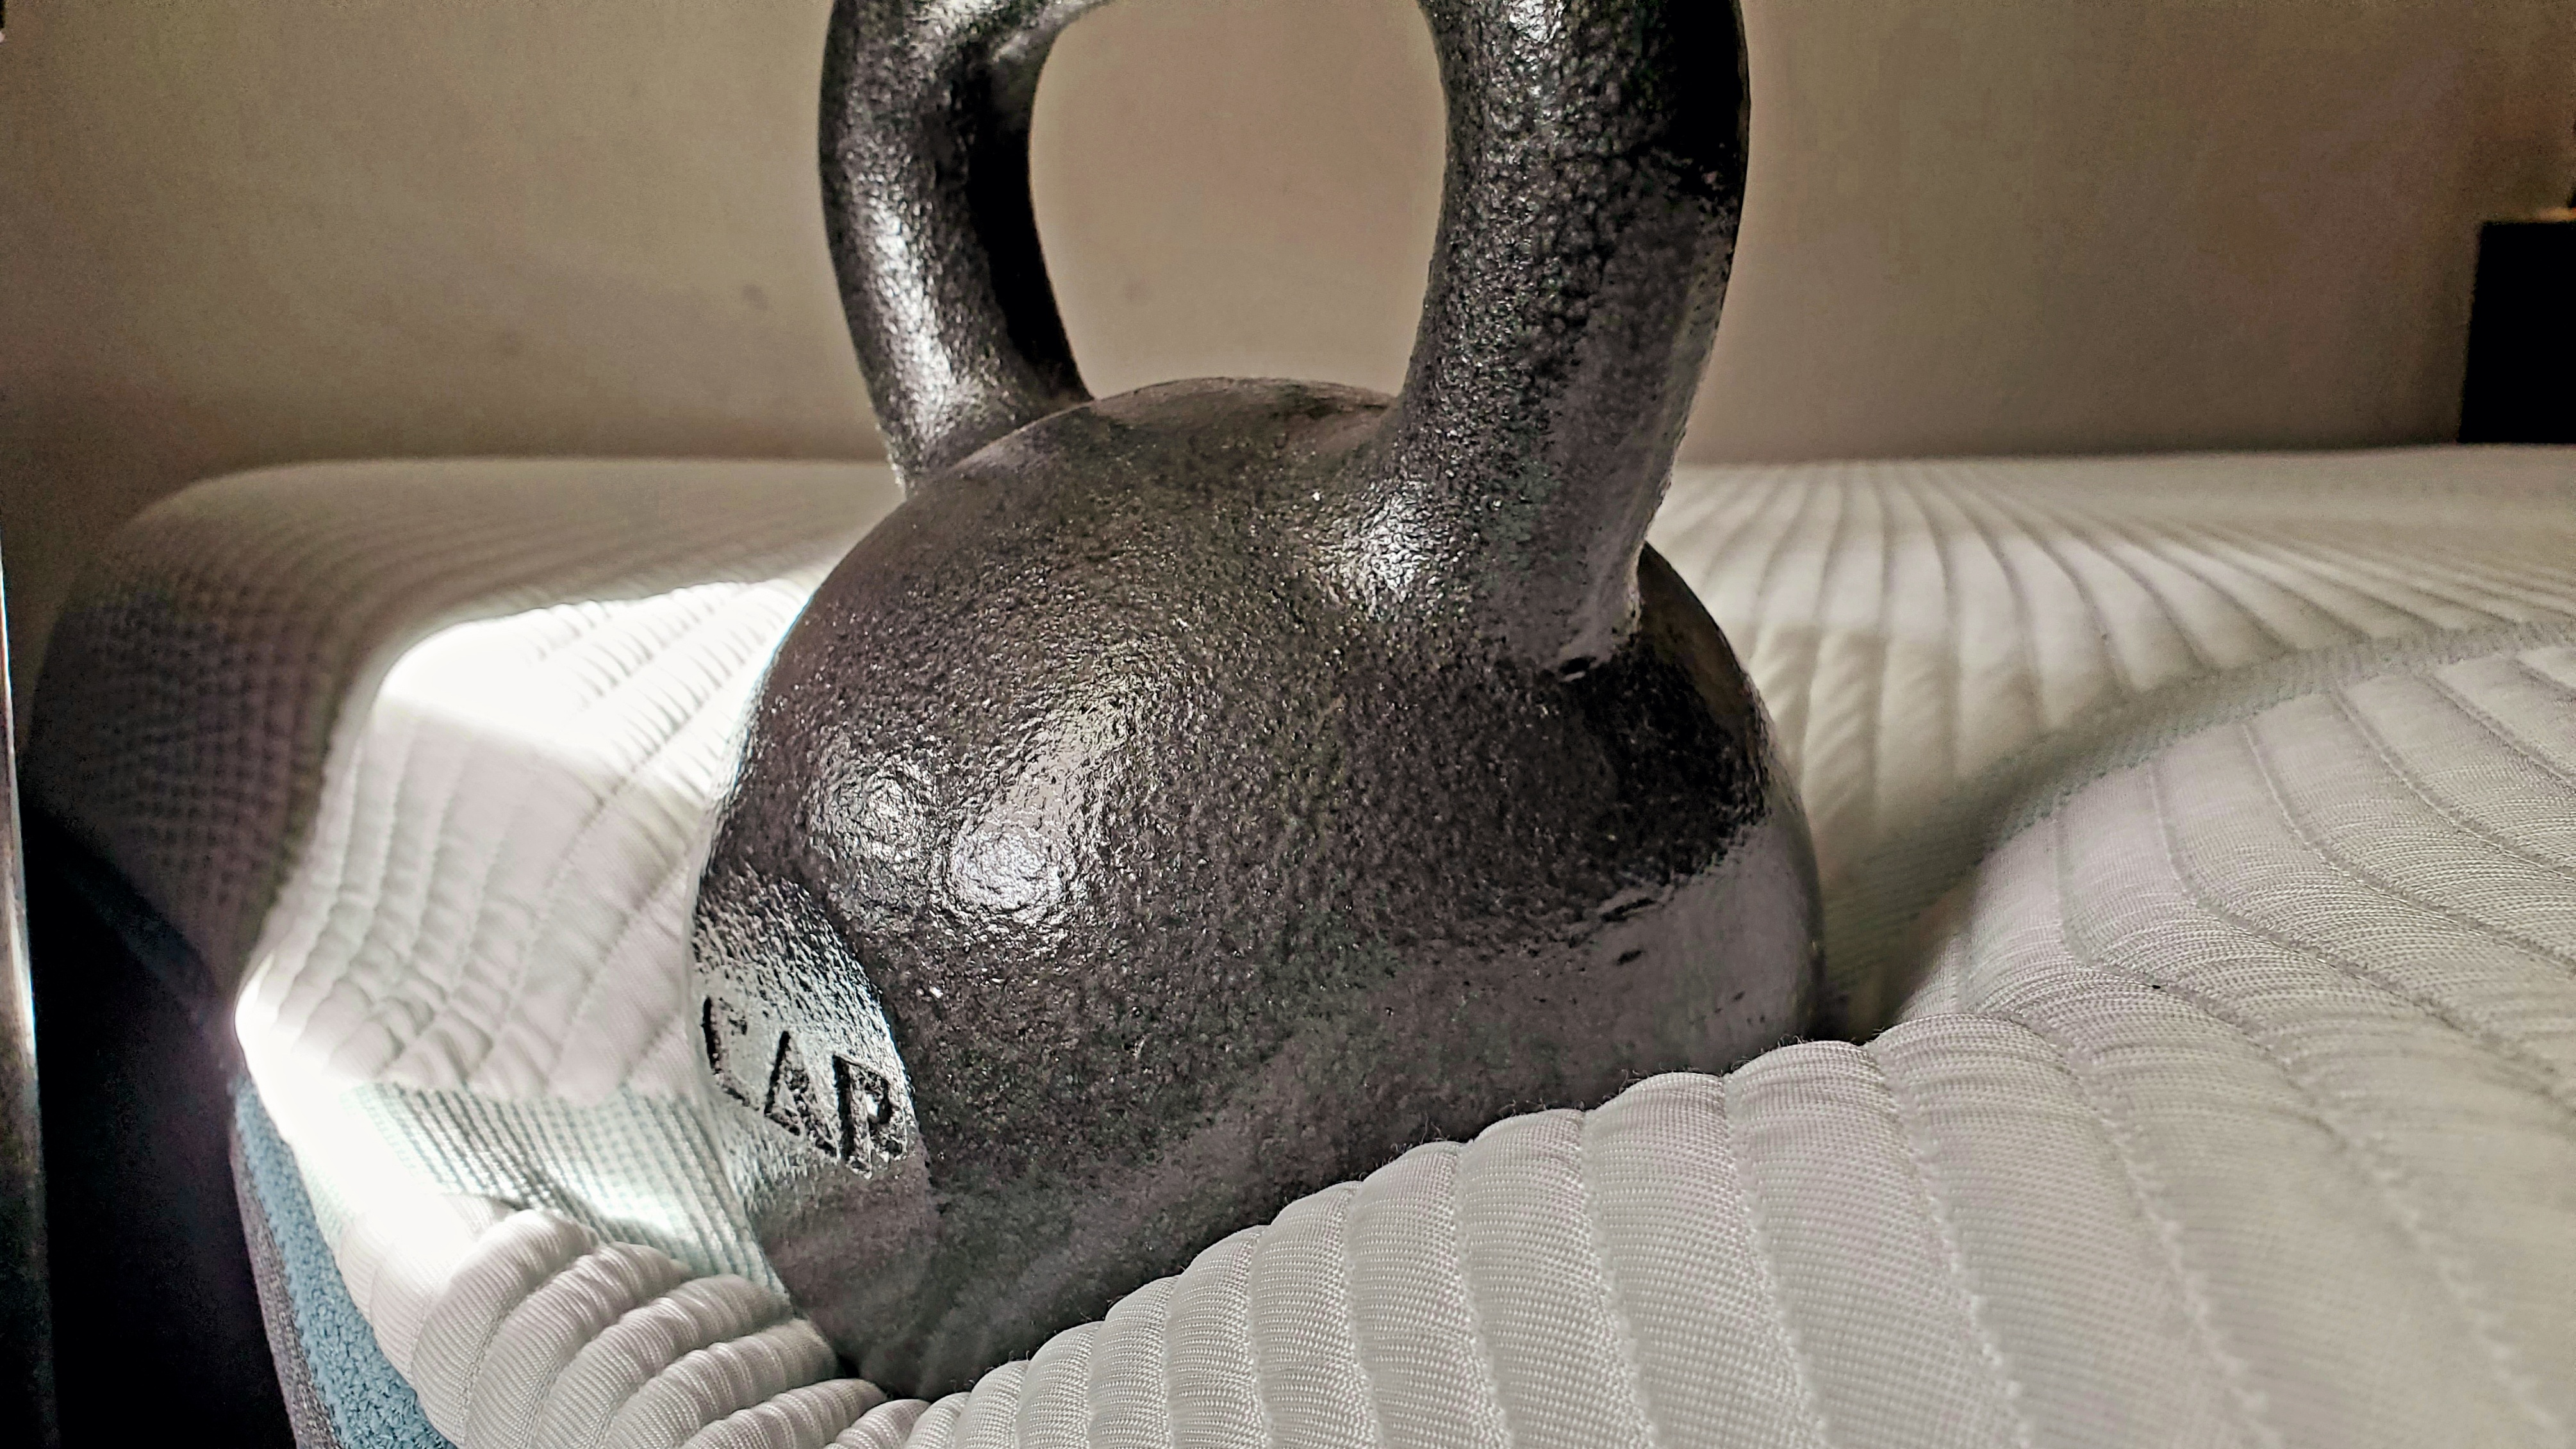 Testing the edge support for the Tempur-Adapt mattress review using a kettlebell.